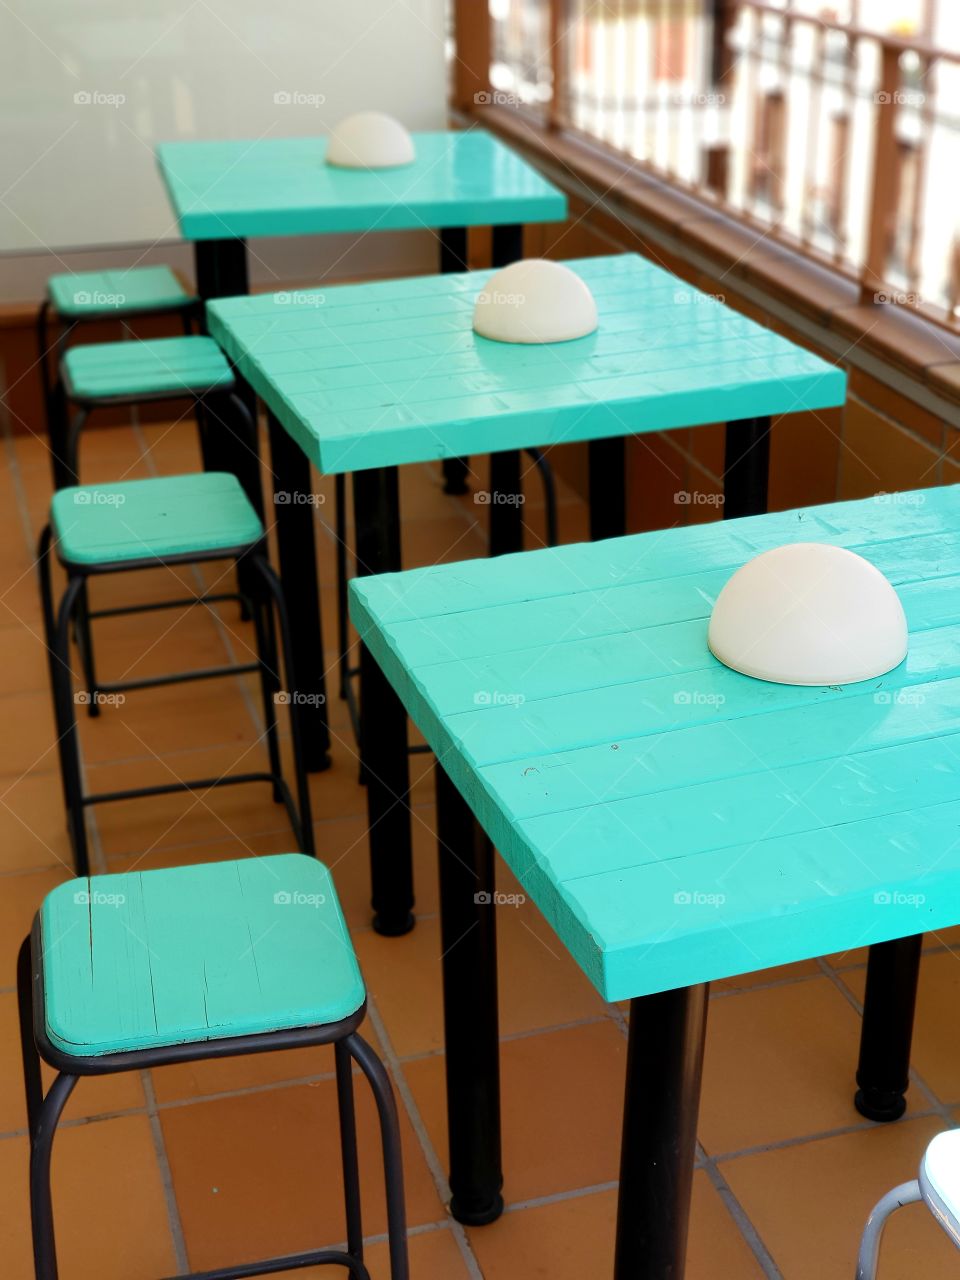 Turquoise tables and chairs